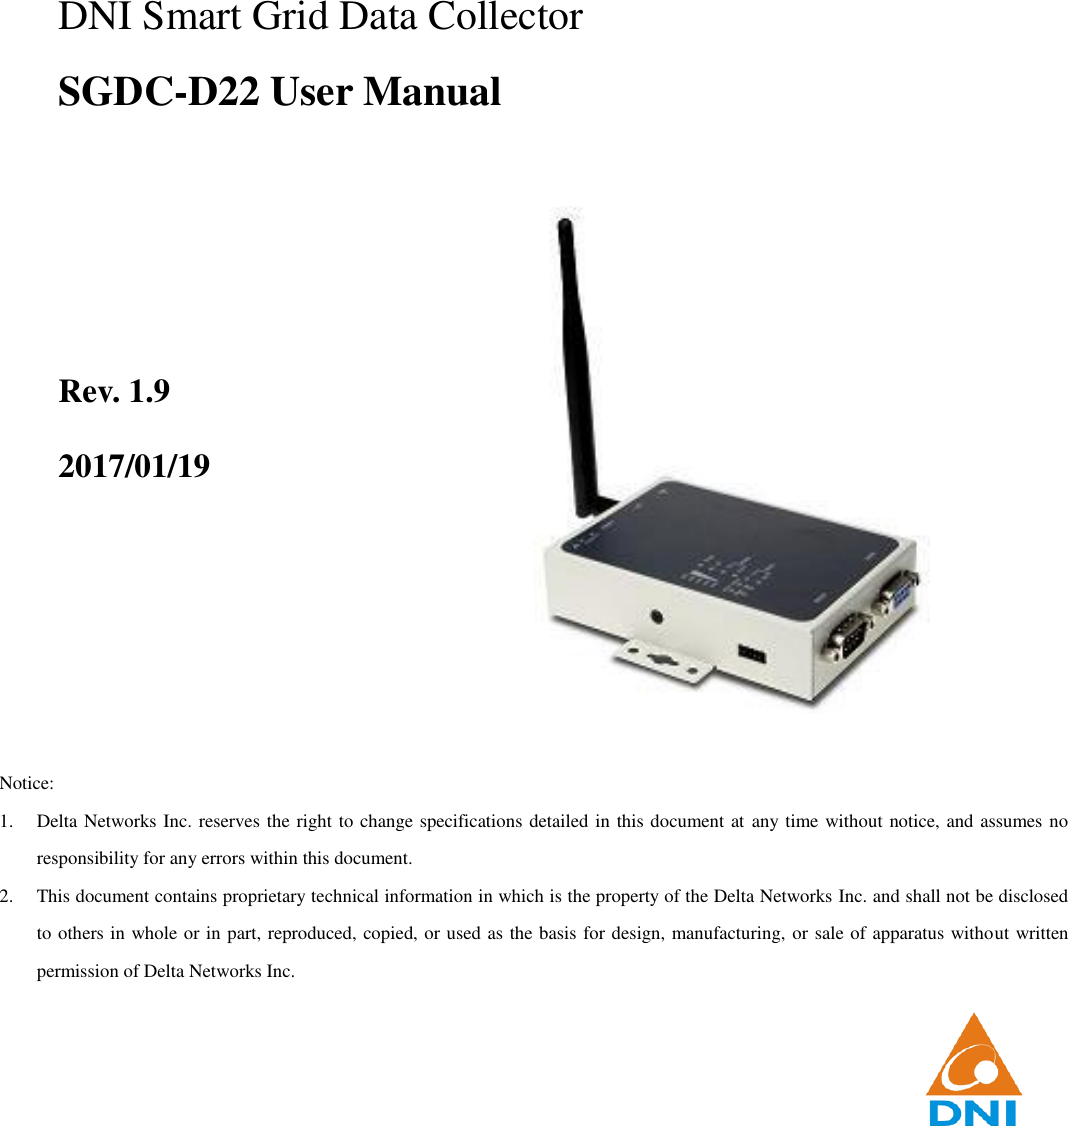                                                            DNI Smart Grid Data Collector SGDC-D22 User Manual    Rev. 1.9 2017/01/19        Notice: 1. Delta Networks Inc. reserves the right to change specifications detailed in this document at any time without notice, and assumes no responsibility for any errors within this document. 2. This document contains proprietary technical information in which is the property of the Delta Networks Inc. and shall not be disclosed to others in whole or in part, reproduced, copied, or used as the basis for design, manufacturing, or sale of apparatus without written permission of Delta Networks Inc. 